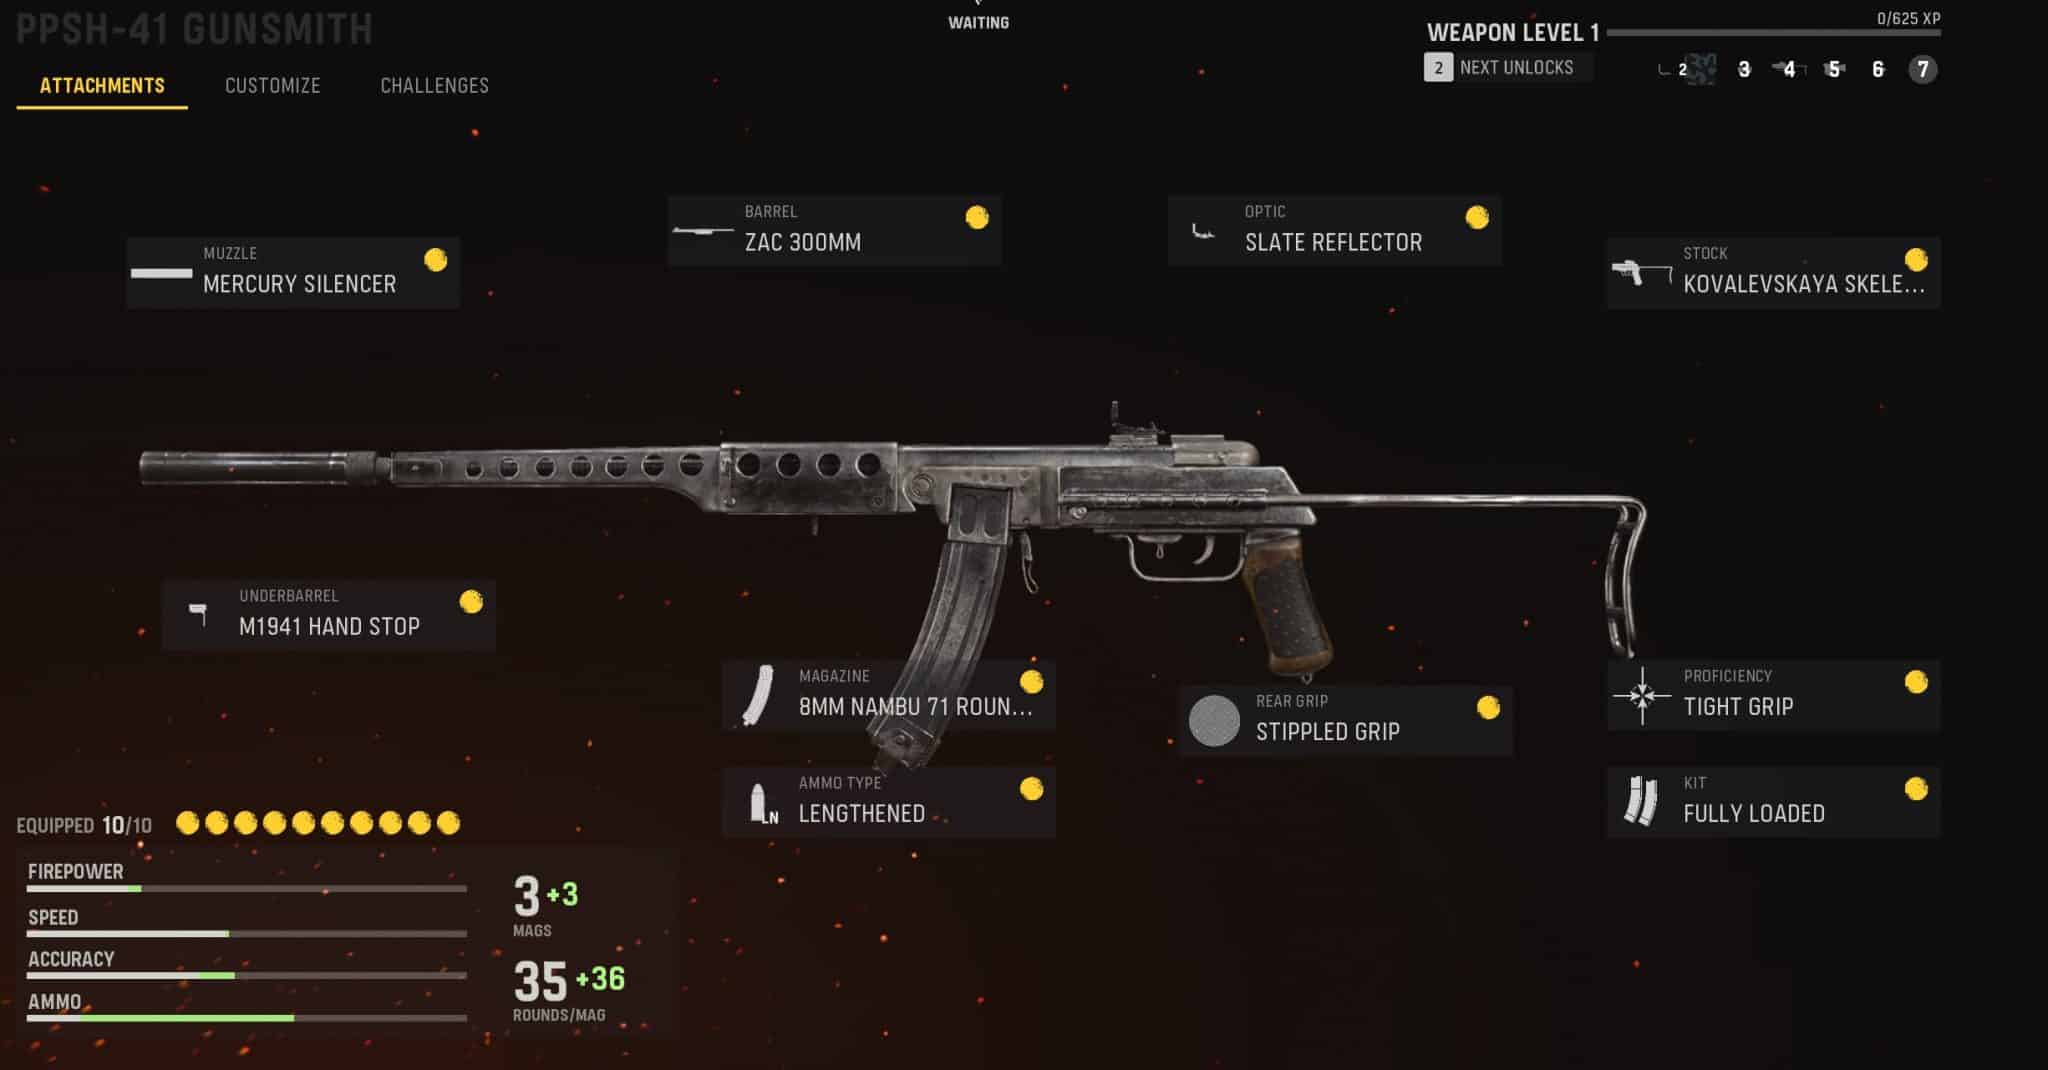 PPSH in the Vanguard loadout screen